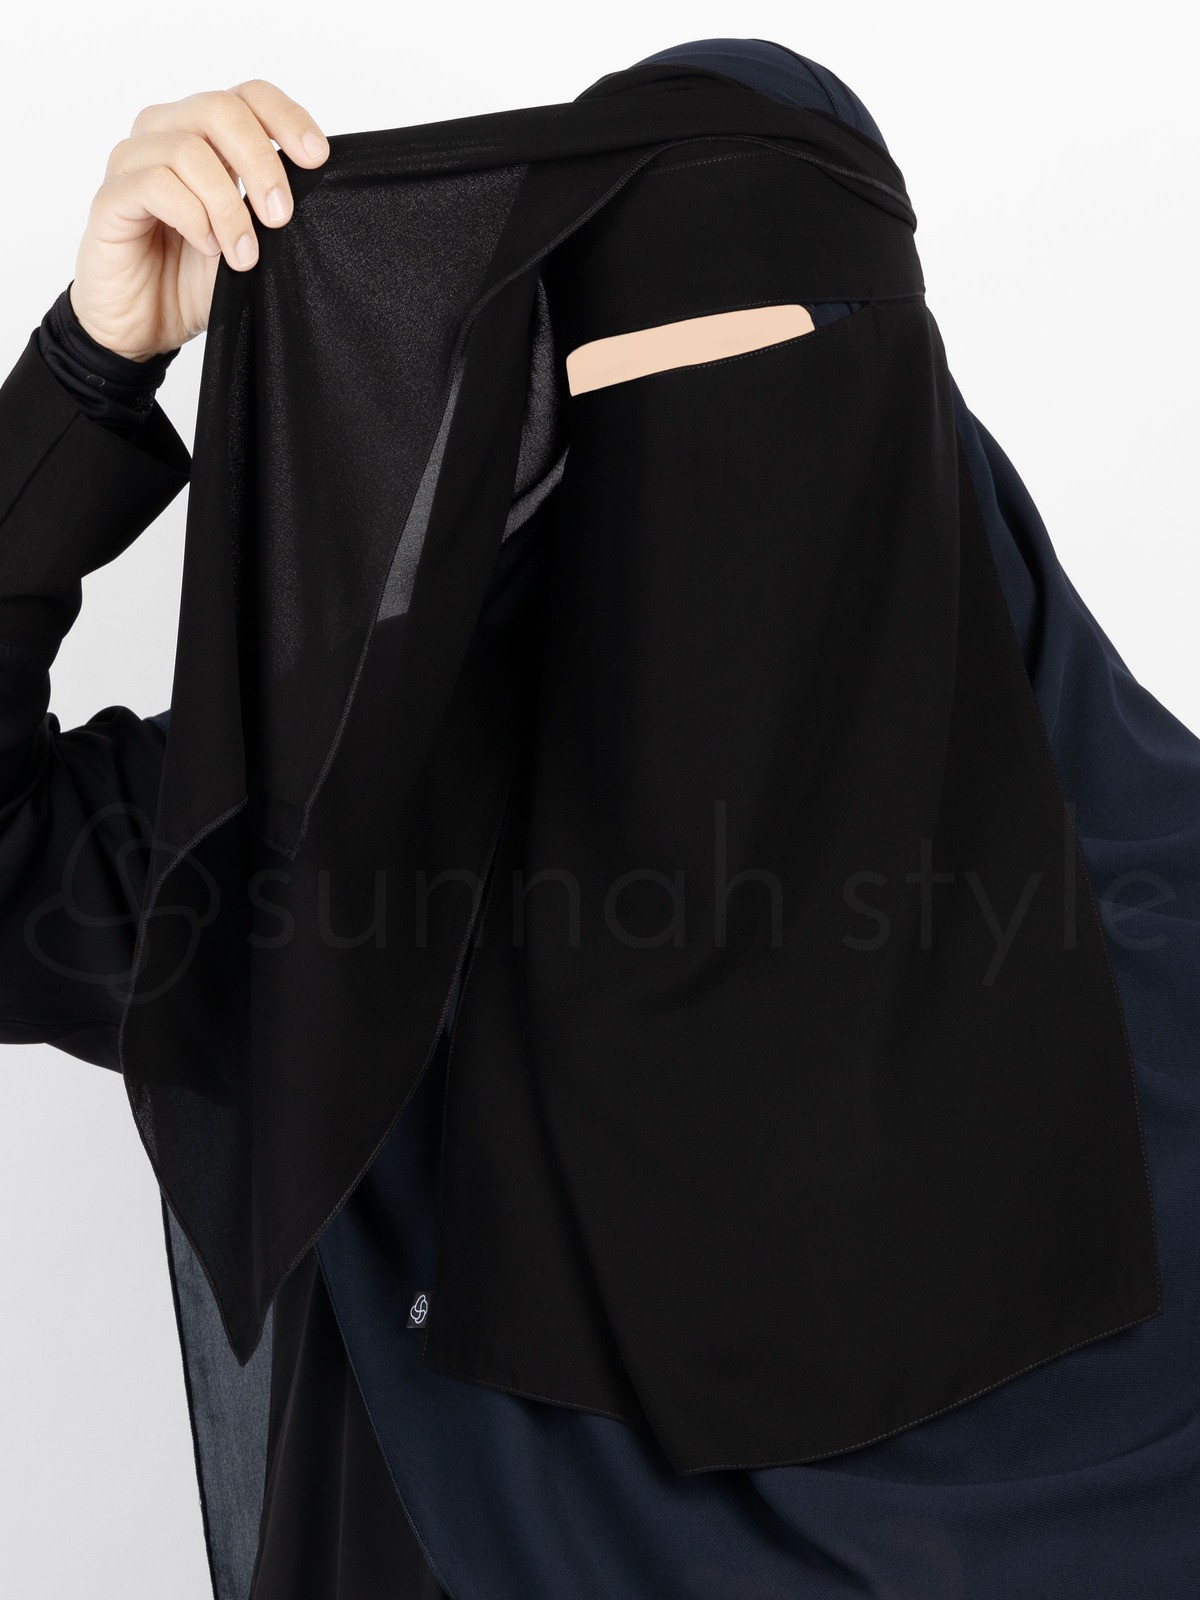 Sunnah Style - Two Layer Niqab (Black)